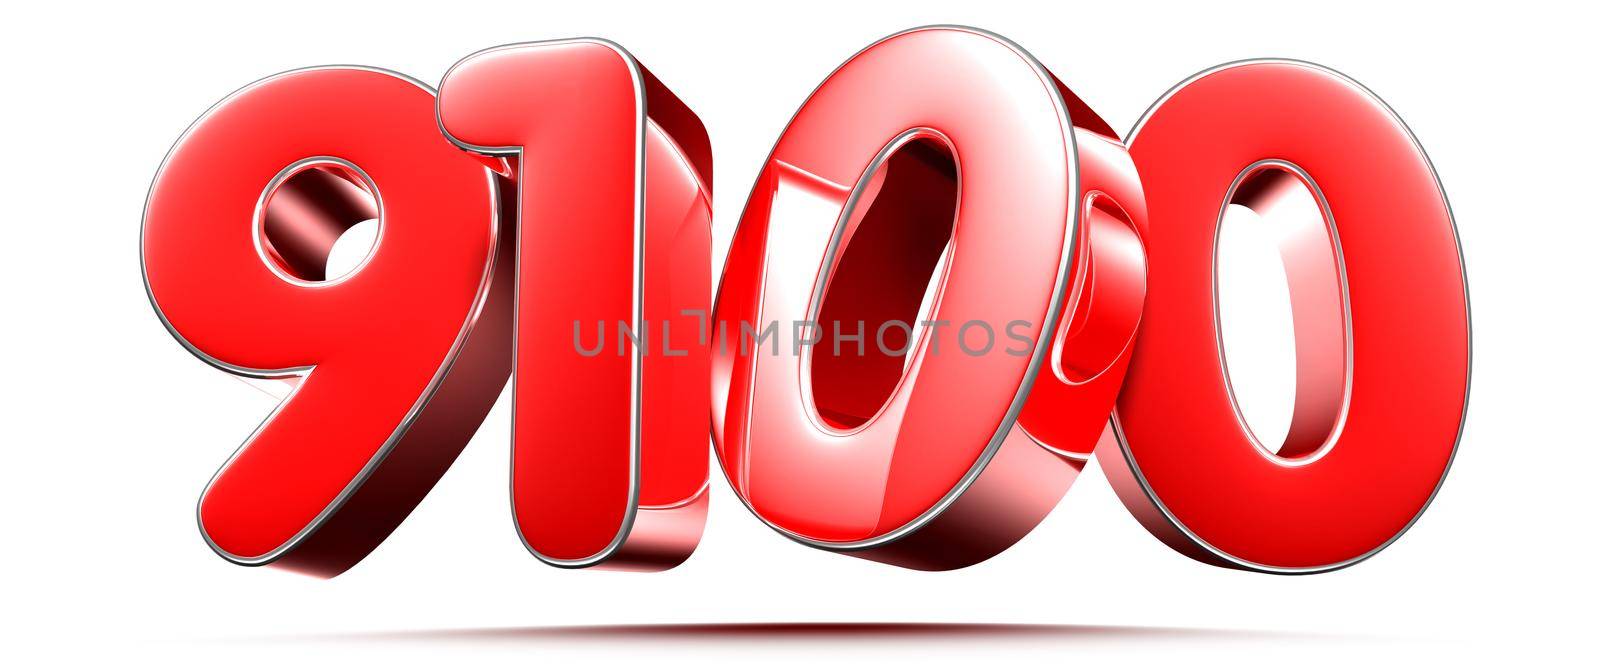 Rounded red numbers 9100 on white background 3D illustration with clipping path